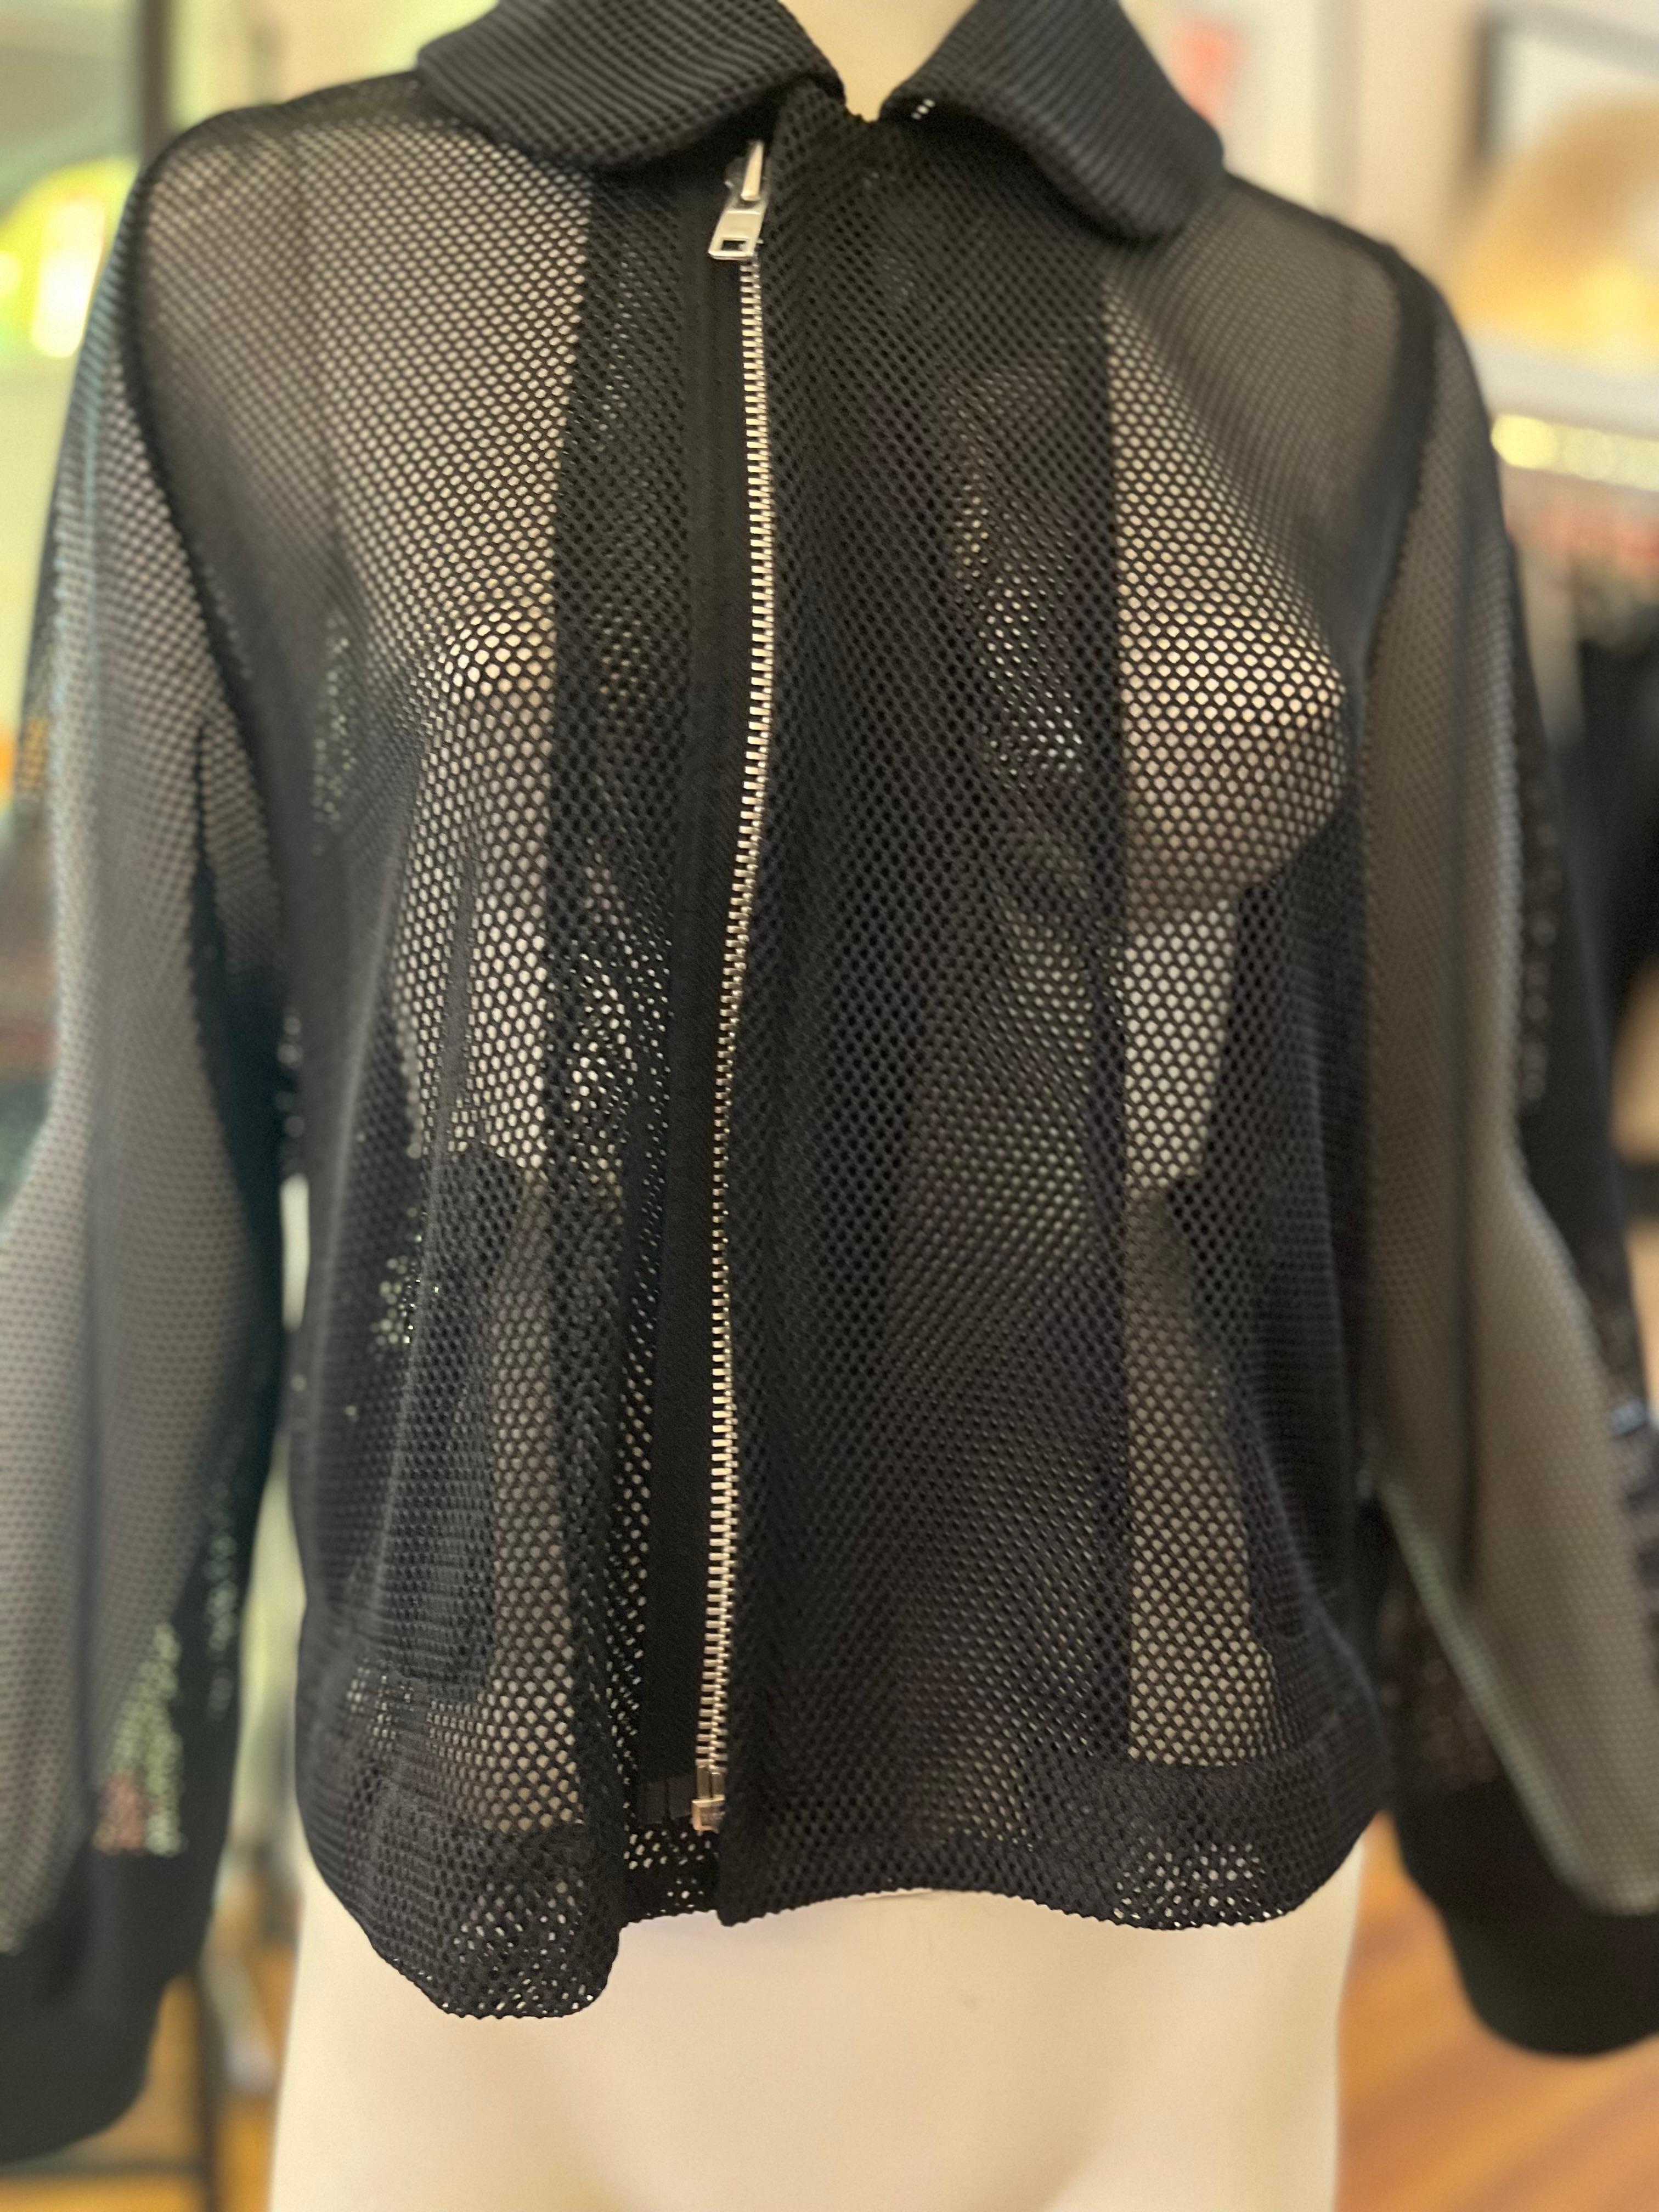 Designed by Japanese designer Rei Kawabuko, this jacket is constructed of polyester mesh with pockets on the inside. The jacket has a round collar; two adjustable half belts at the back; ribbed cuffs, and a zip at the front which is slightly off